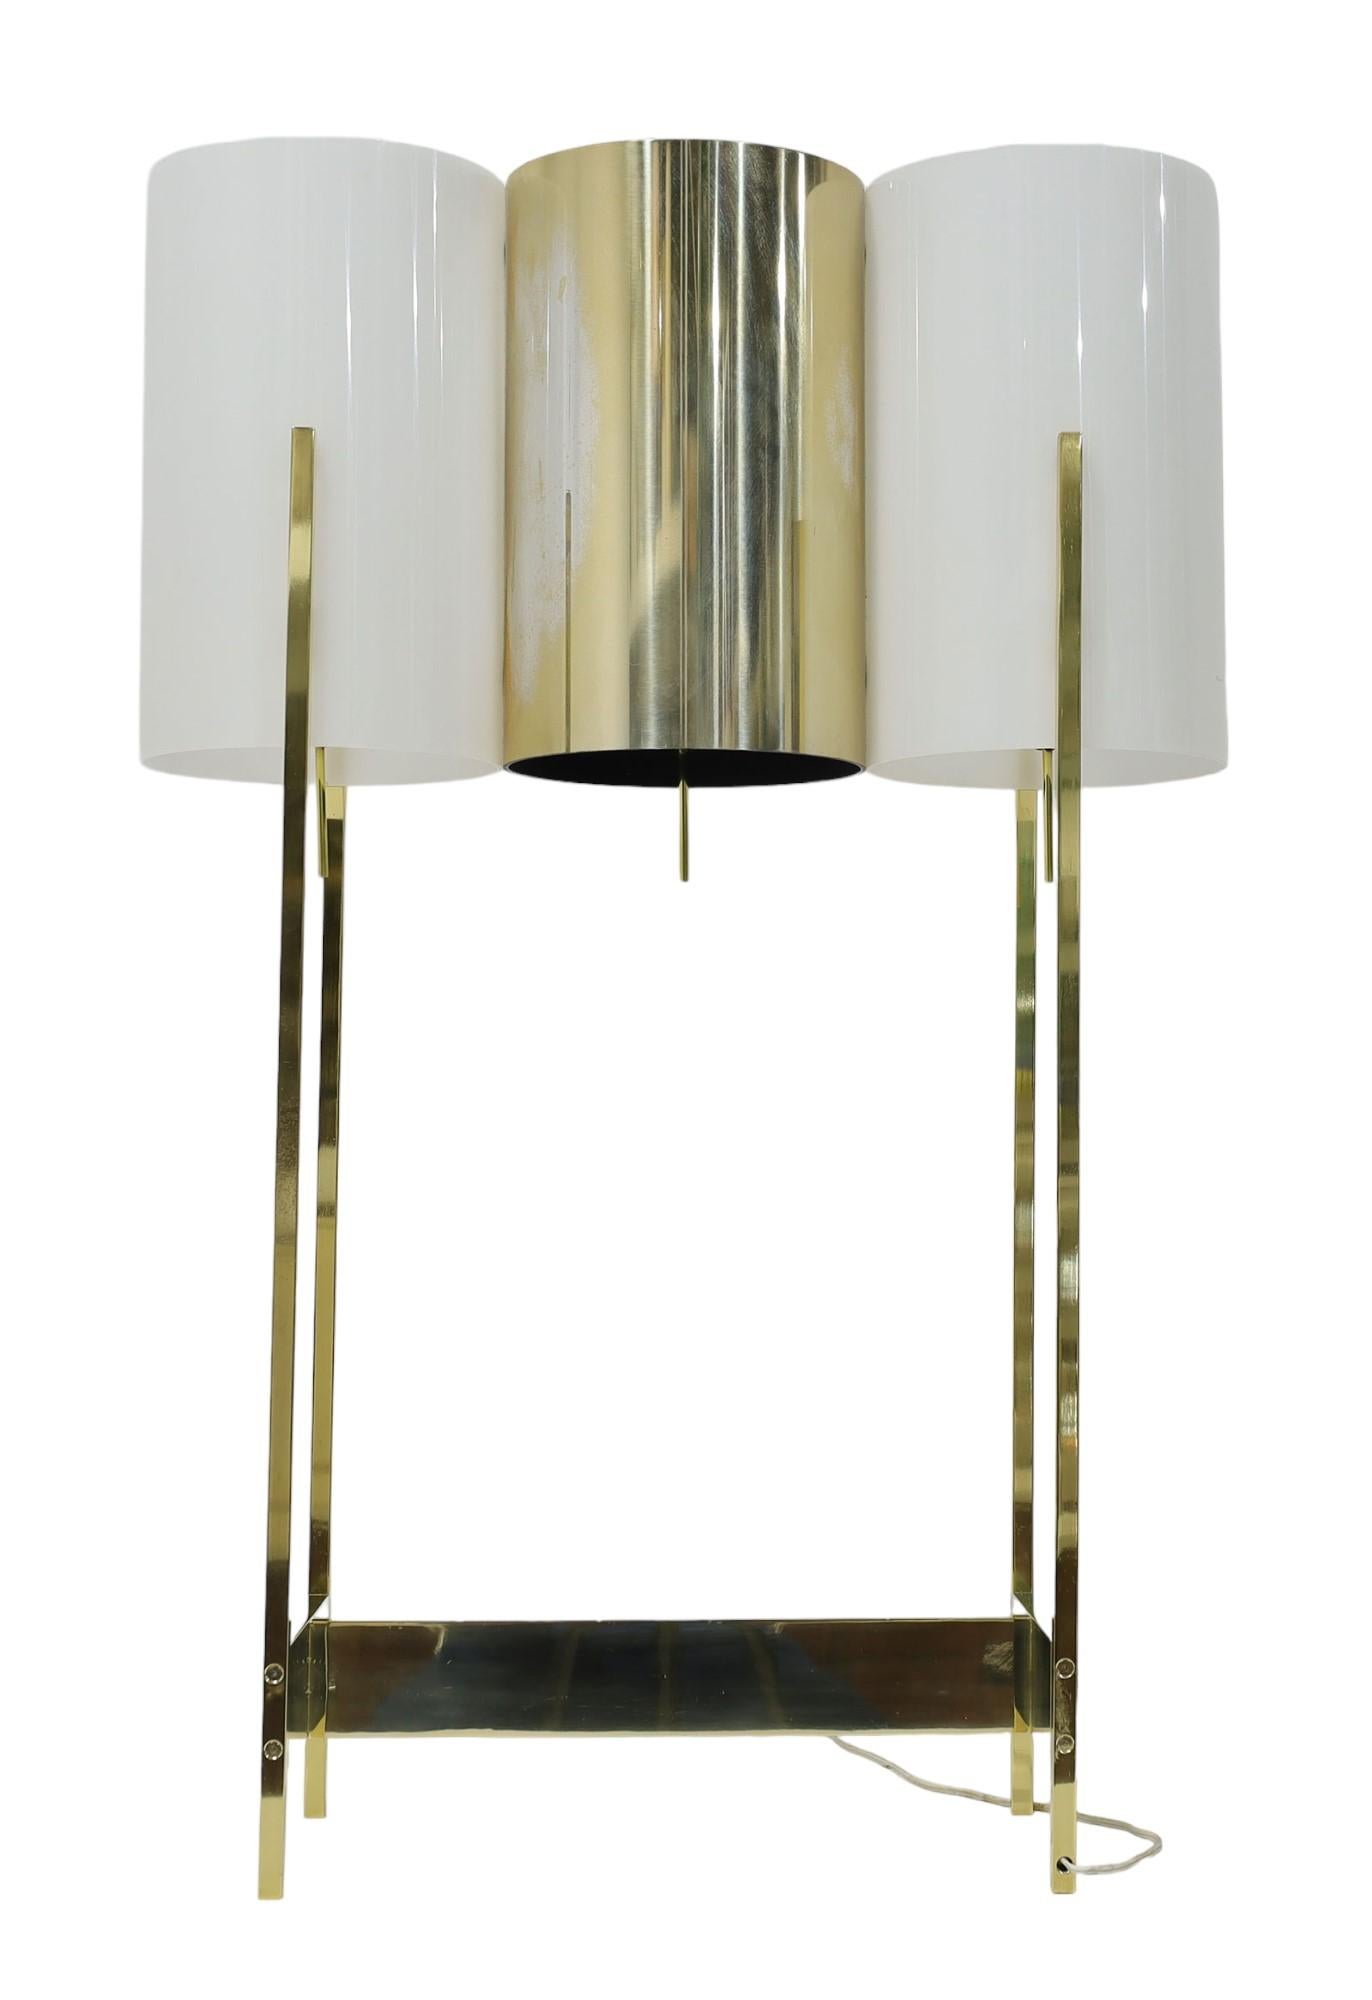 Very rare and stunning pair of Paul Mayen brass and lucite table lamps. Each lamp has three cylinders, 2 lucite and one brass. Independent on/off switches for each cylinder. These are very large at 36.5